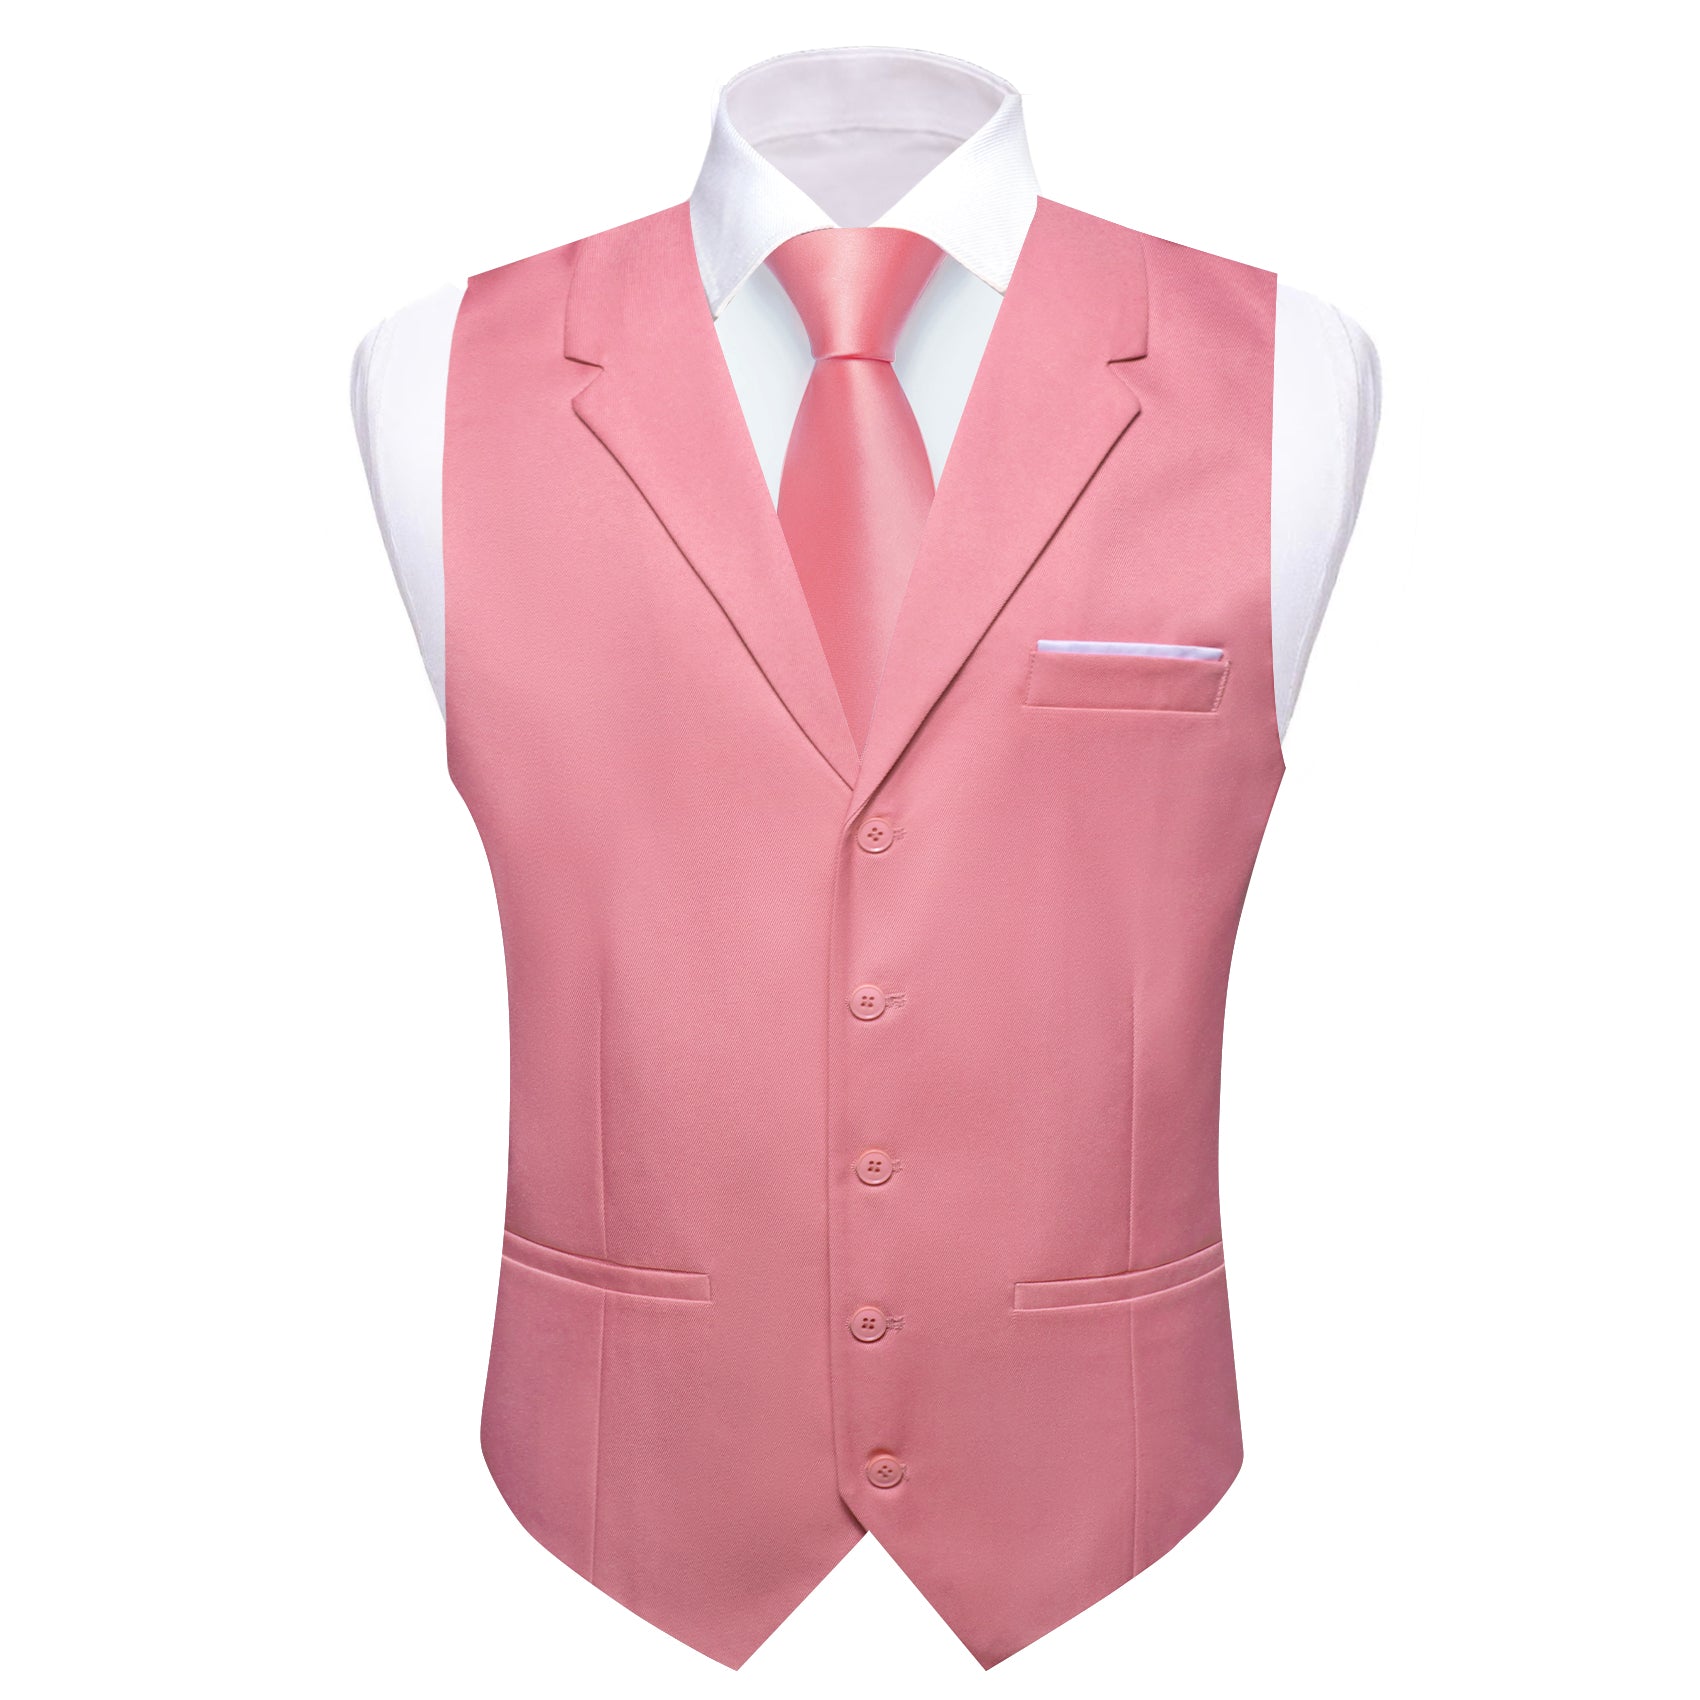 Barry.wang Men's Vest Pale Red Silk Solid Vest Notched Collar Waistcoat